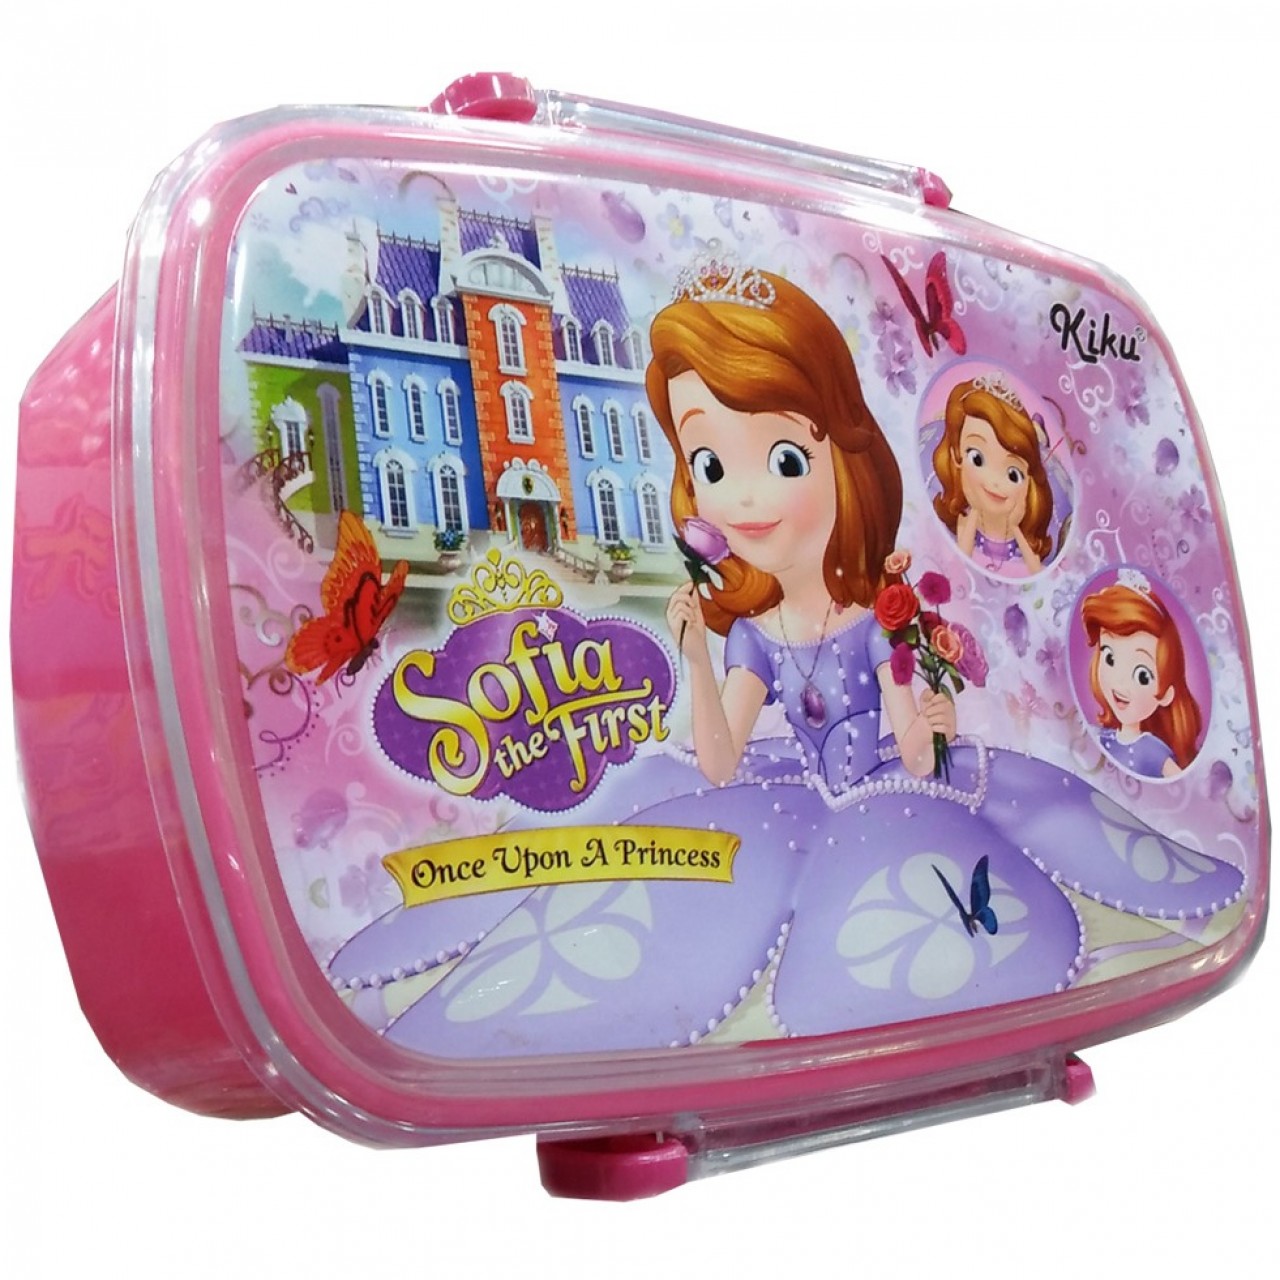 Kiku Sofia the first themed Lunch box for Girls - Pink